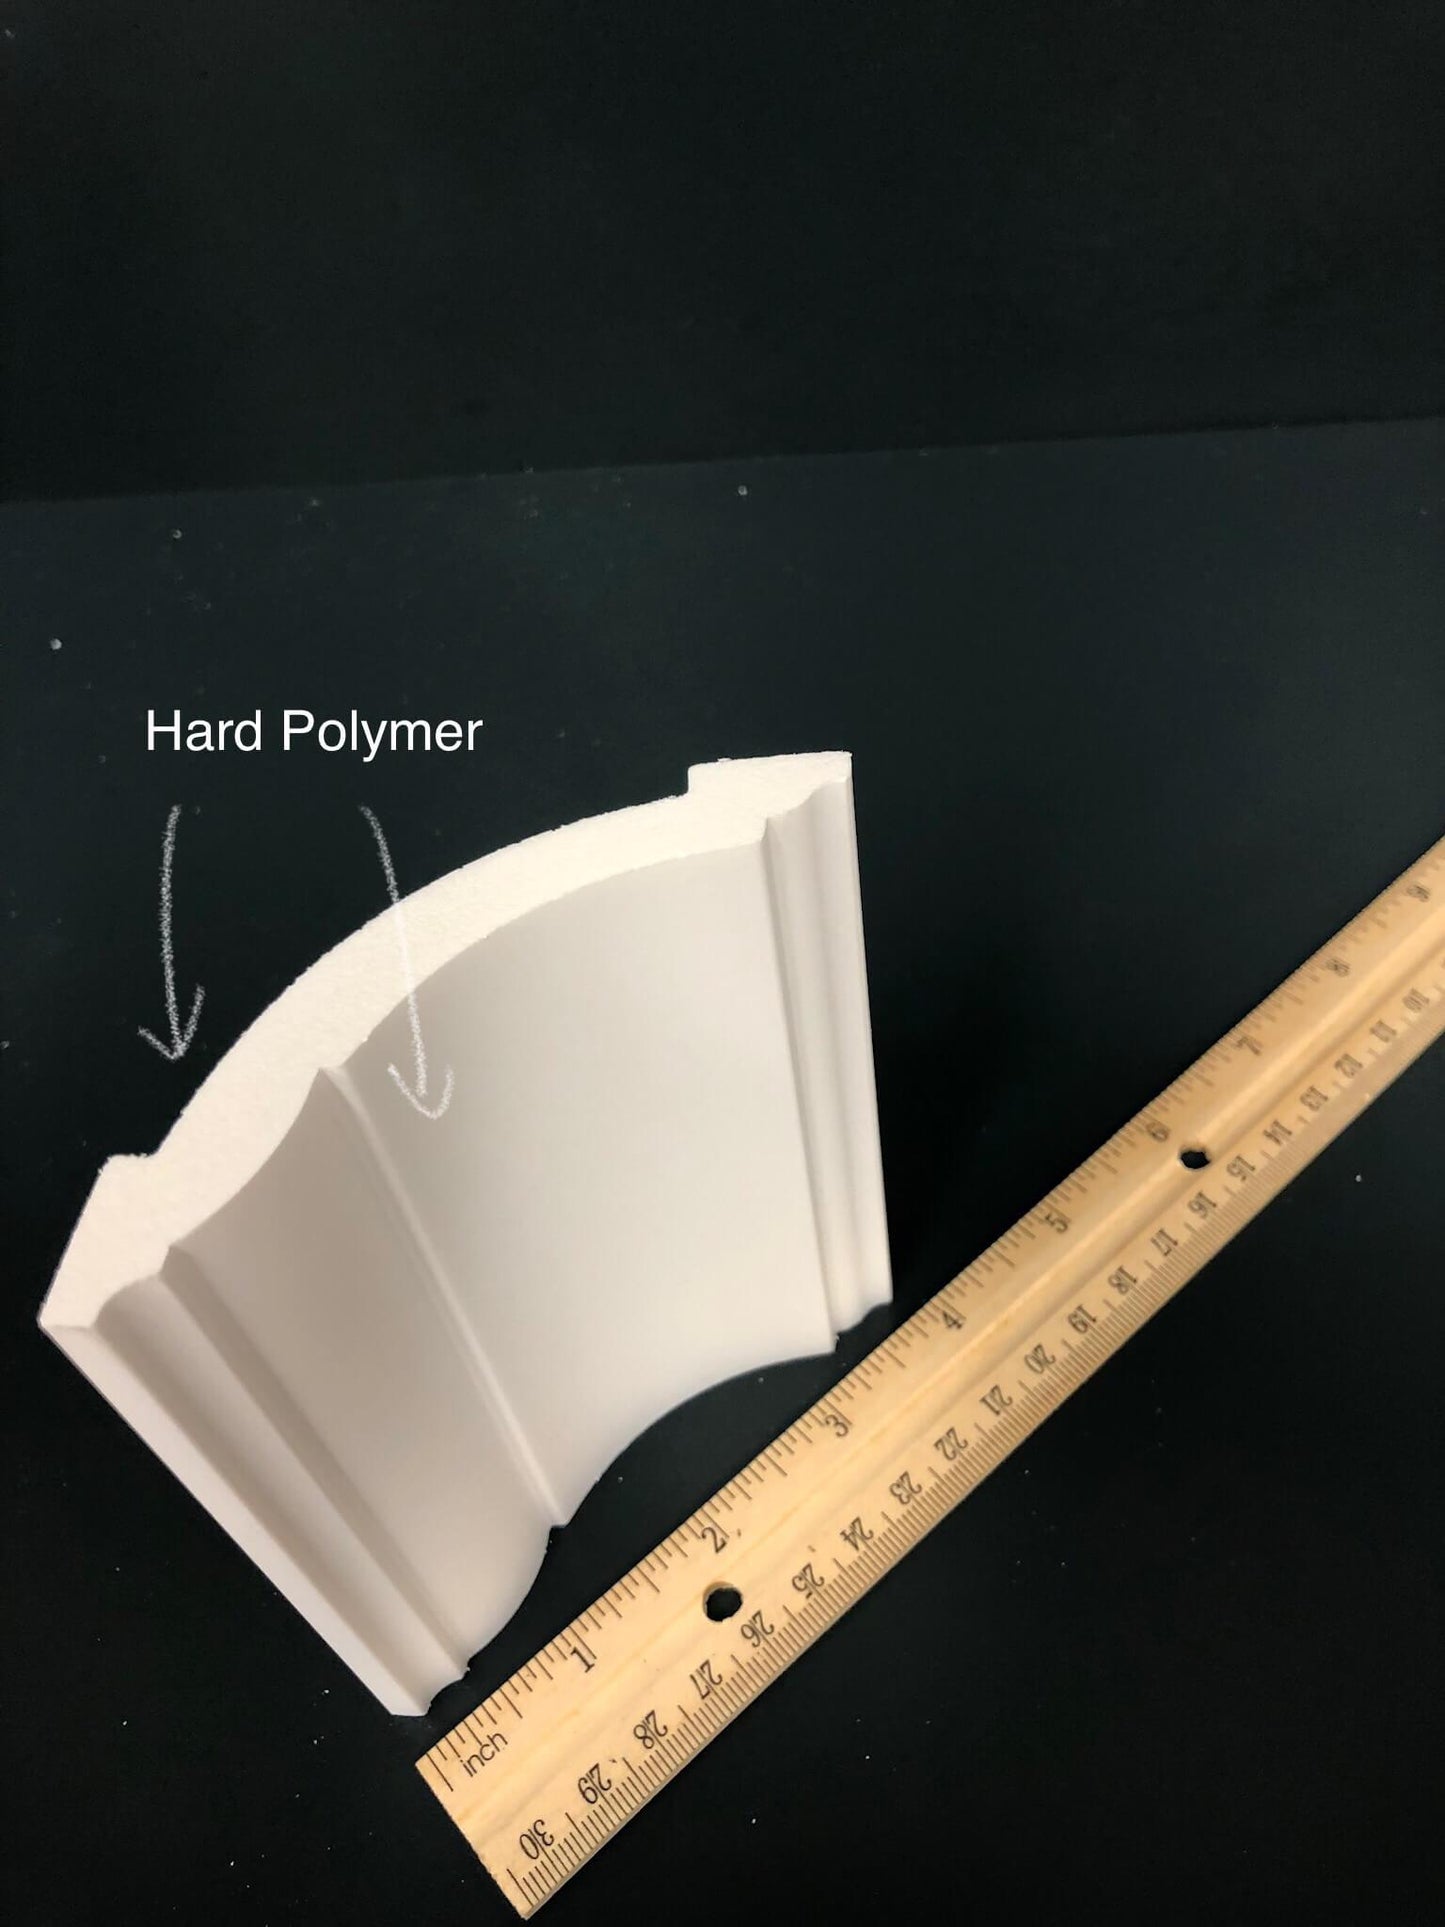 MD367 - Lightweight Coving measured by a ruler